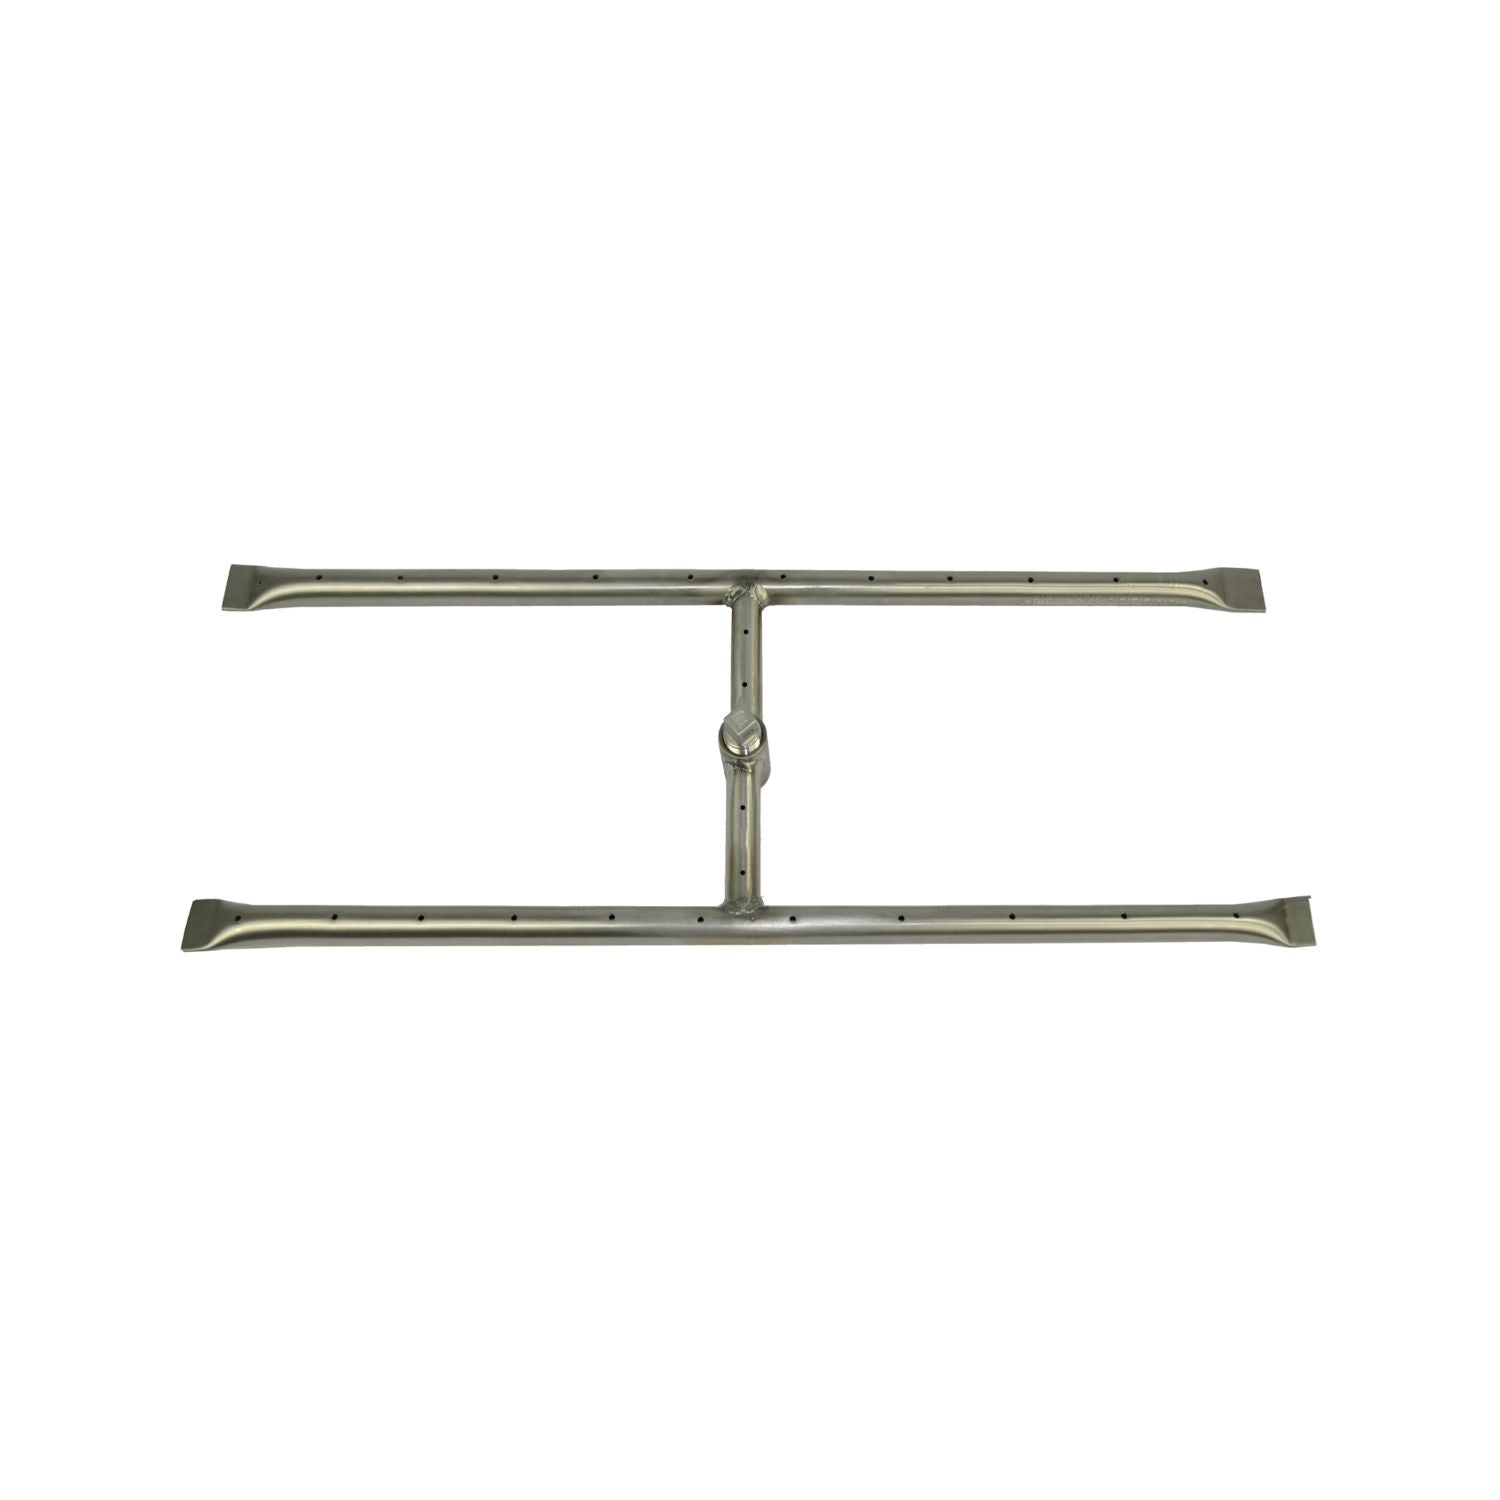 The Outdoor Plus "H" Burner Stainless Steel